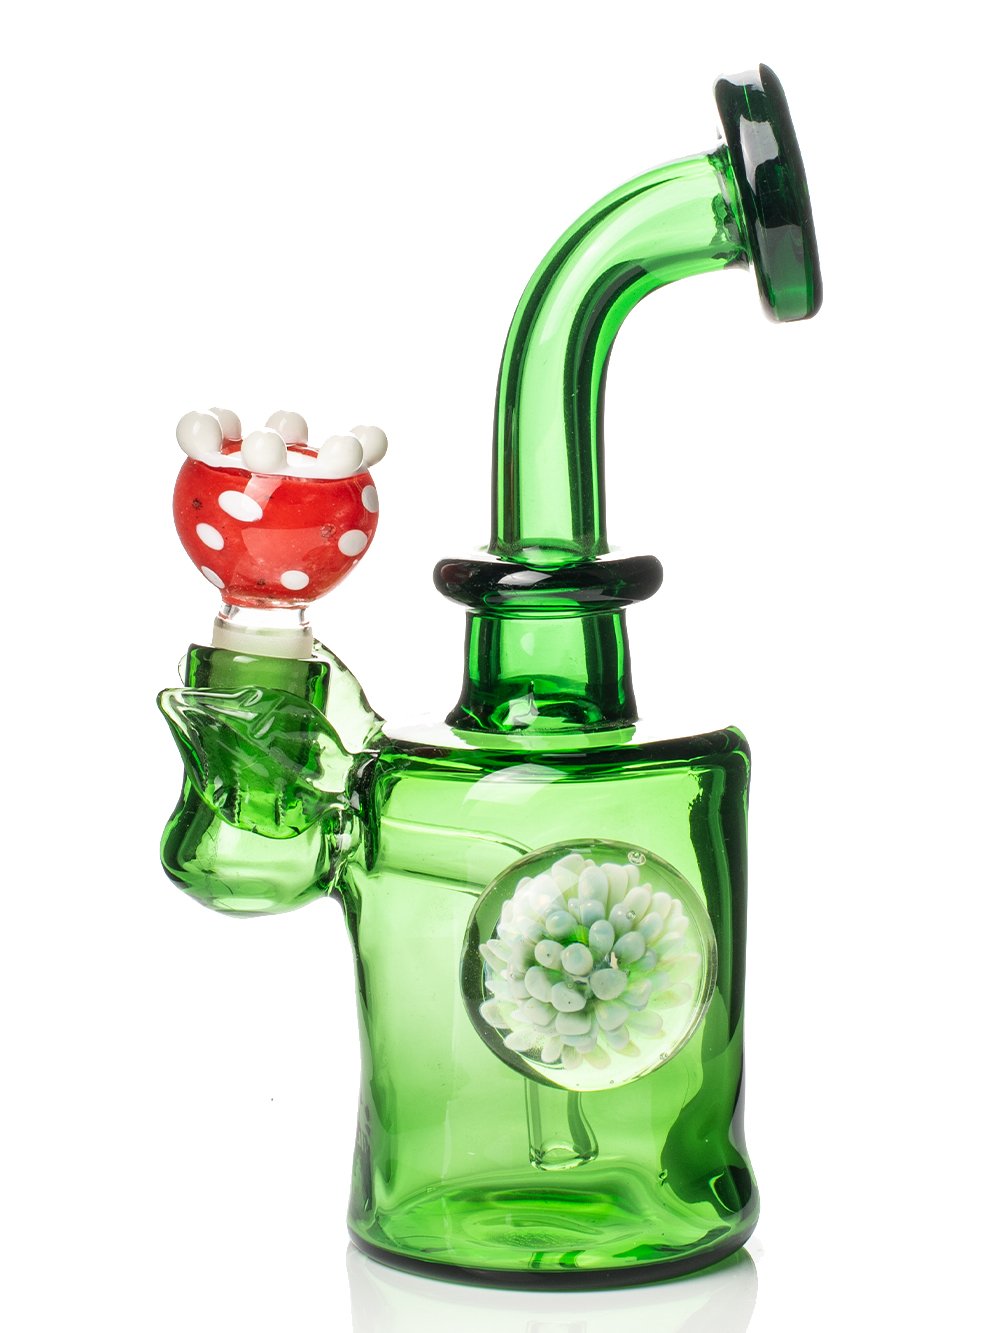 Mini Style Glass Bong with a Carb Blue 5.9 - small bongs, sale portable  bongs, buy a small bong online on